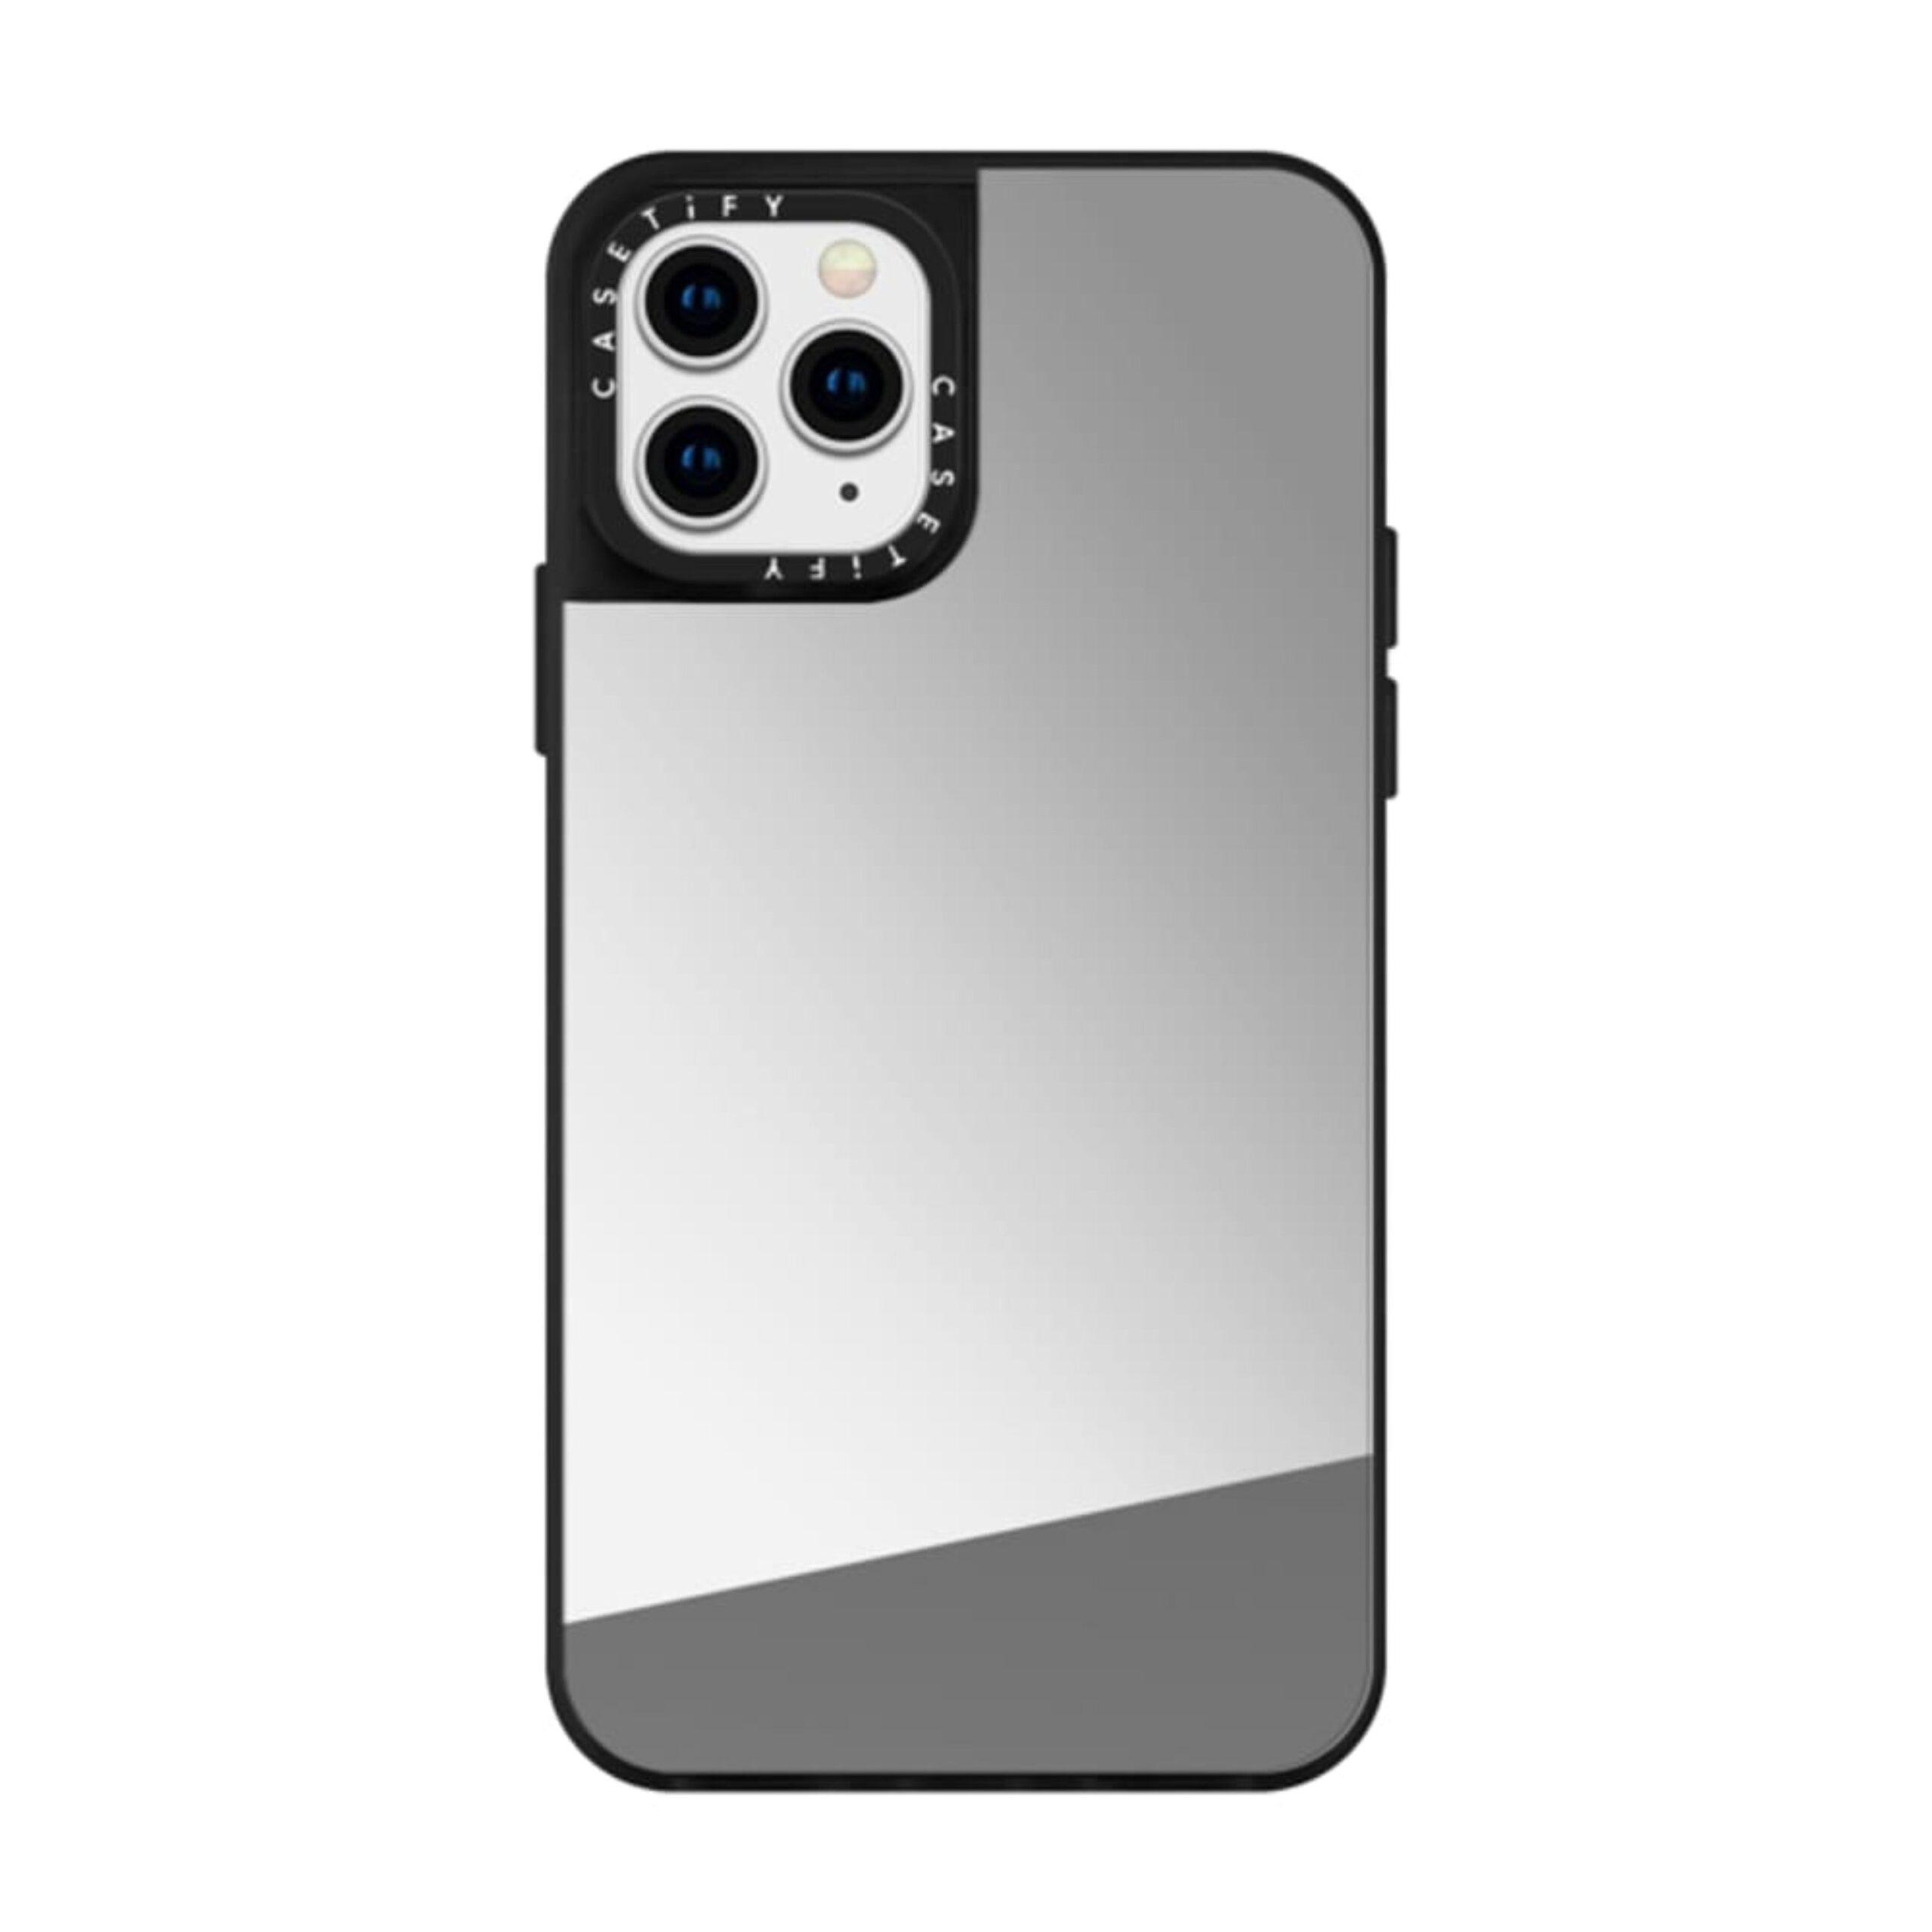 Casetify MIRROR Apple iPhone 12 Pro Max Case - Reflective Mirror Case, Shockproof TPU Bumper, Slim & LightWeight, Wireless & MagSafe Charging Compatible - Silver